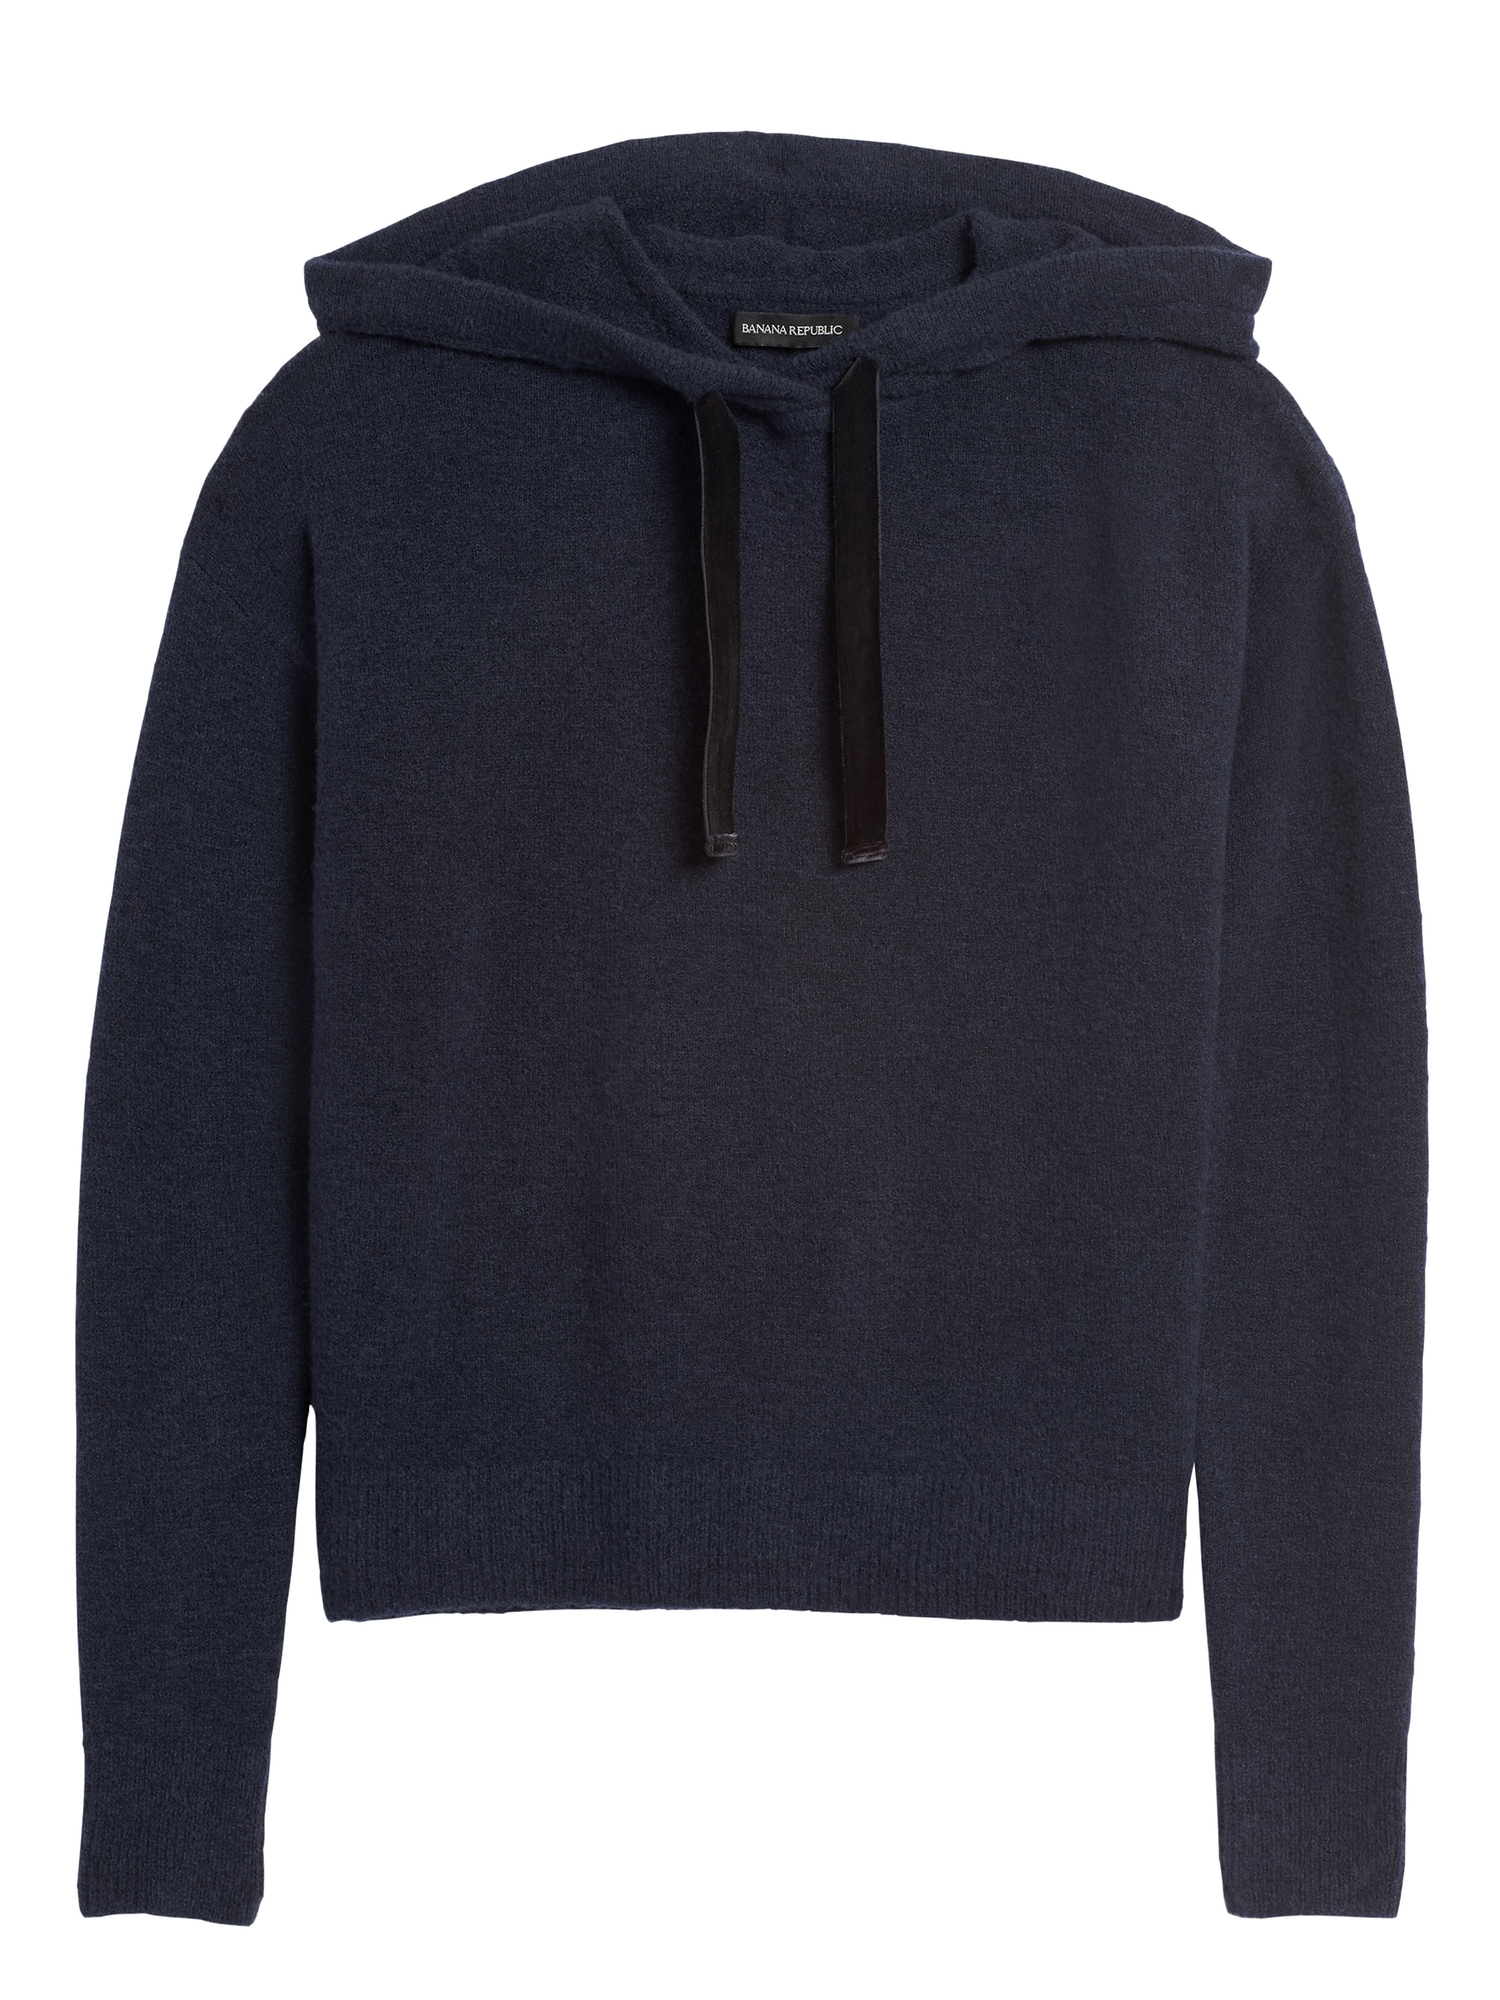 Aire Hoodie Sweater